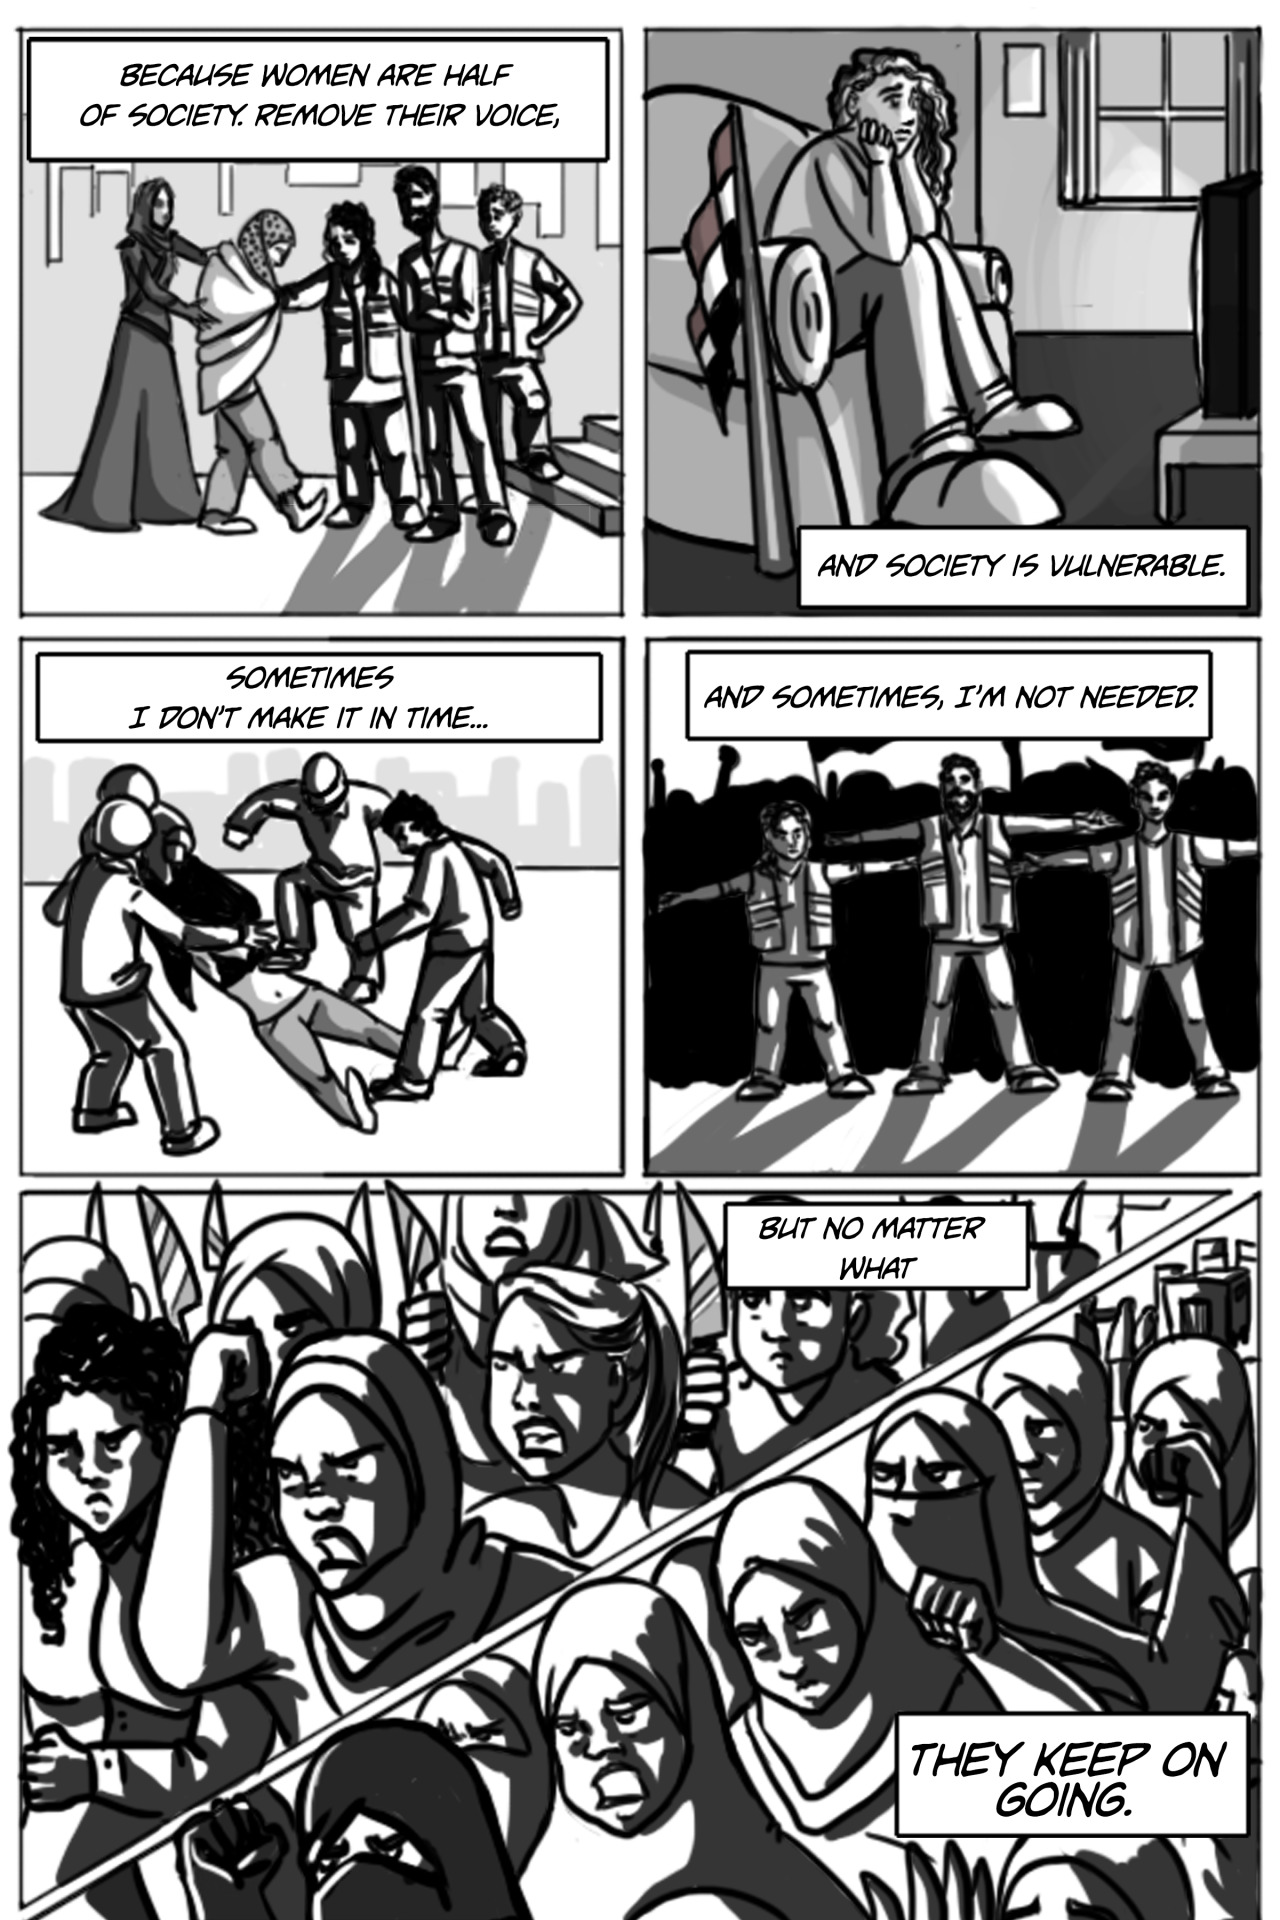 This is less of a superhero comic and more of a tribute. I remember at one point during the revolution, people would use statistics of attacks on women to discredit political movements – and Egyptians – at large. This keeps happening, consistently, both locally and internationally. People will abuse statistics as they see fit, but they will always ignore the women at the base of those statistics. So, politics and superpowers aside, here is my attempt at a tribute to real-life superheroes.
other qahera comics | facebook page
also featured on rebelmusic.com